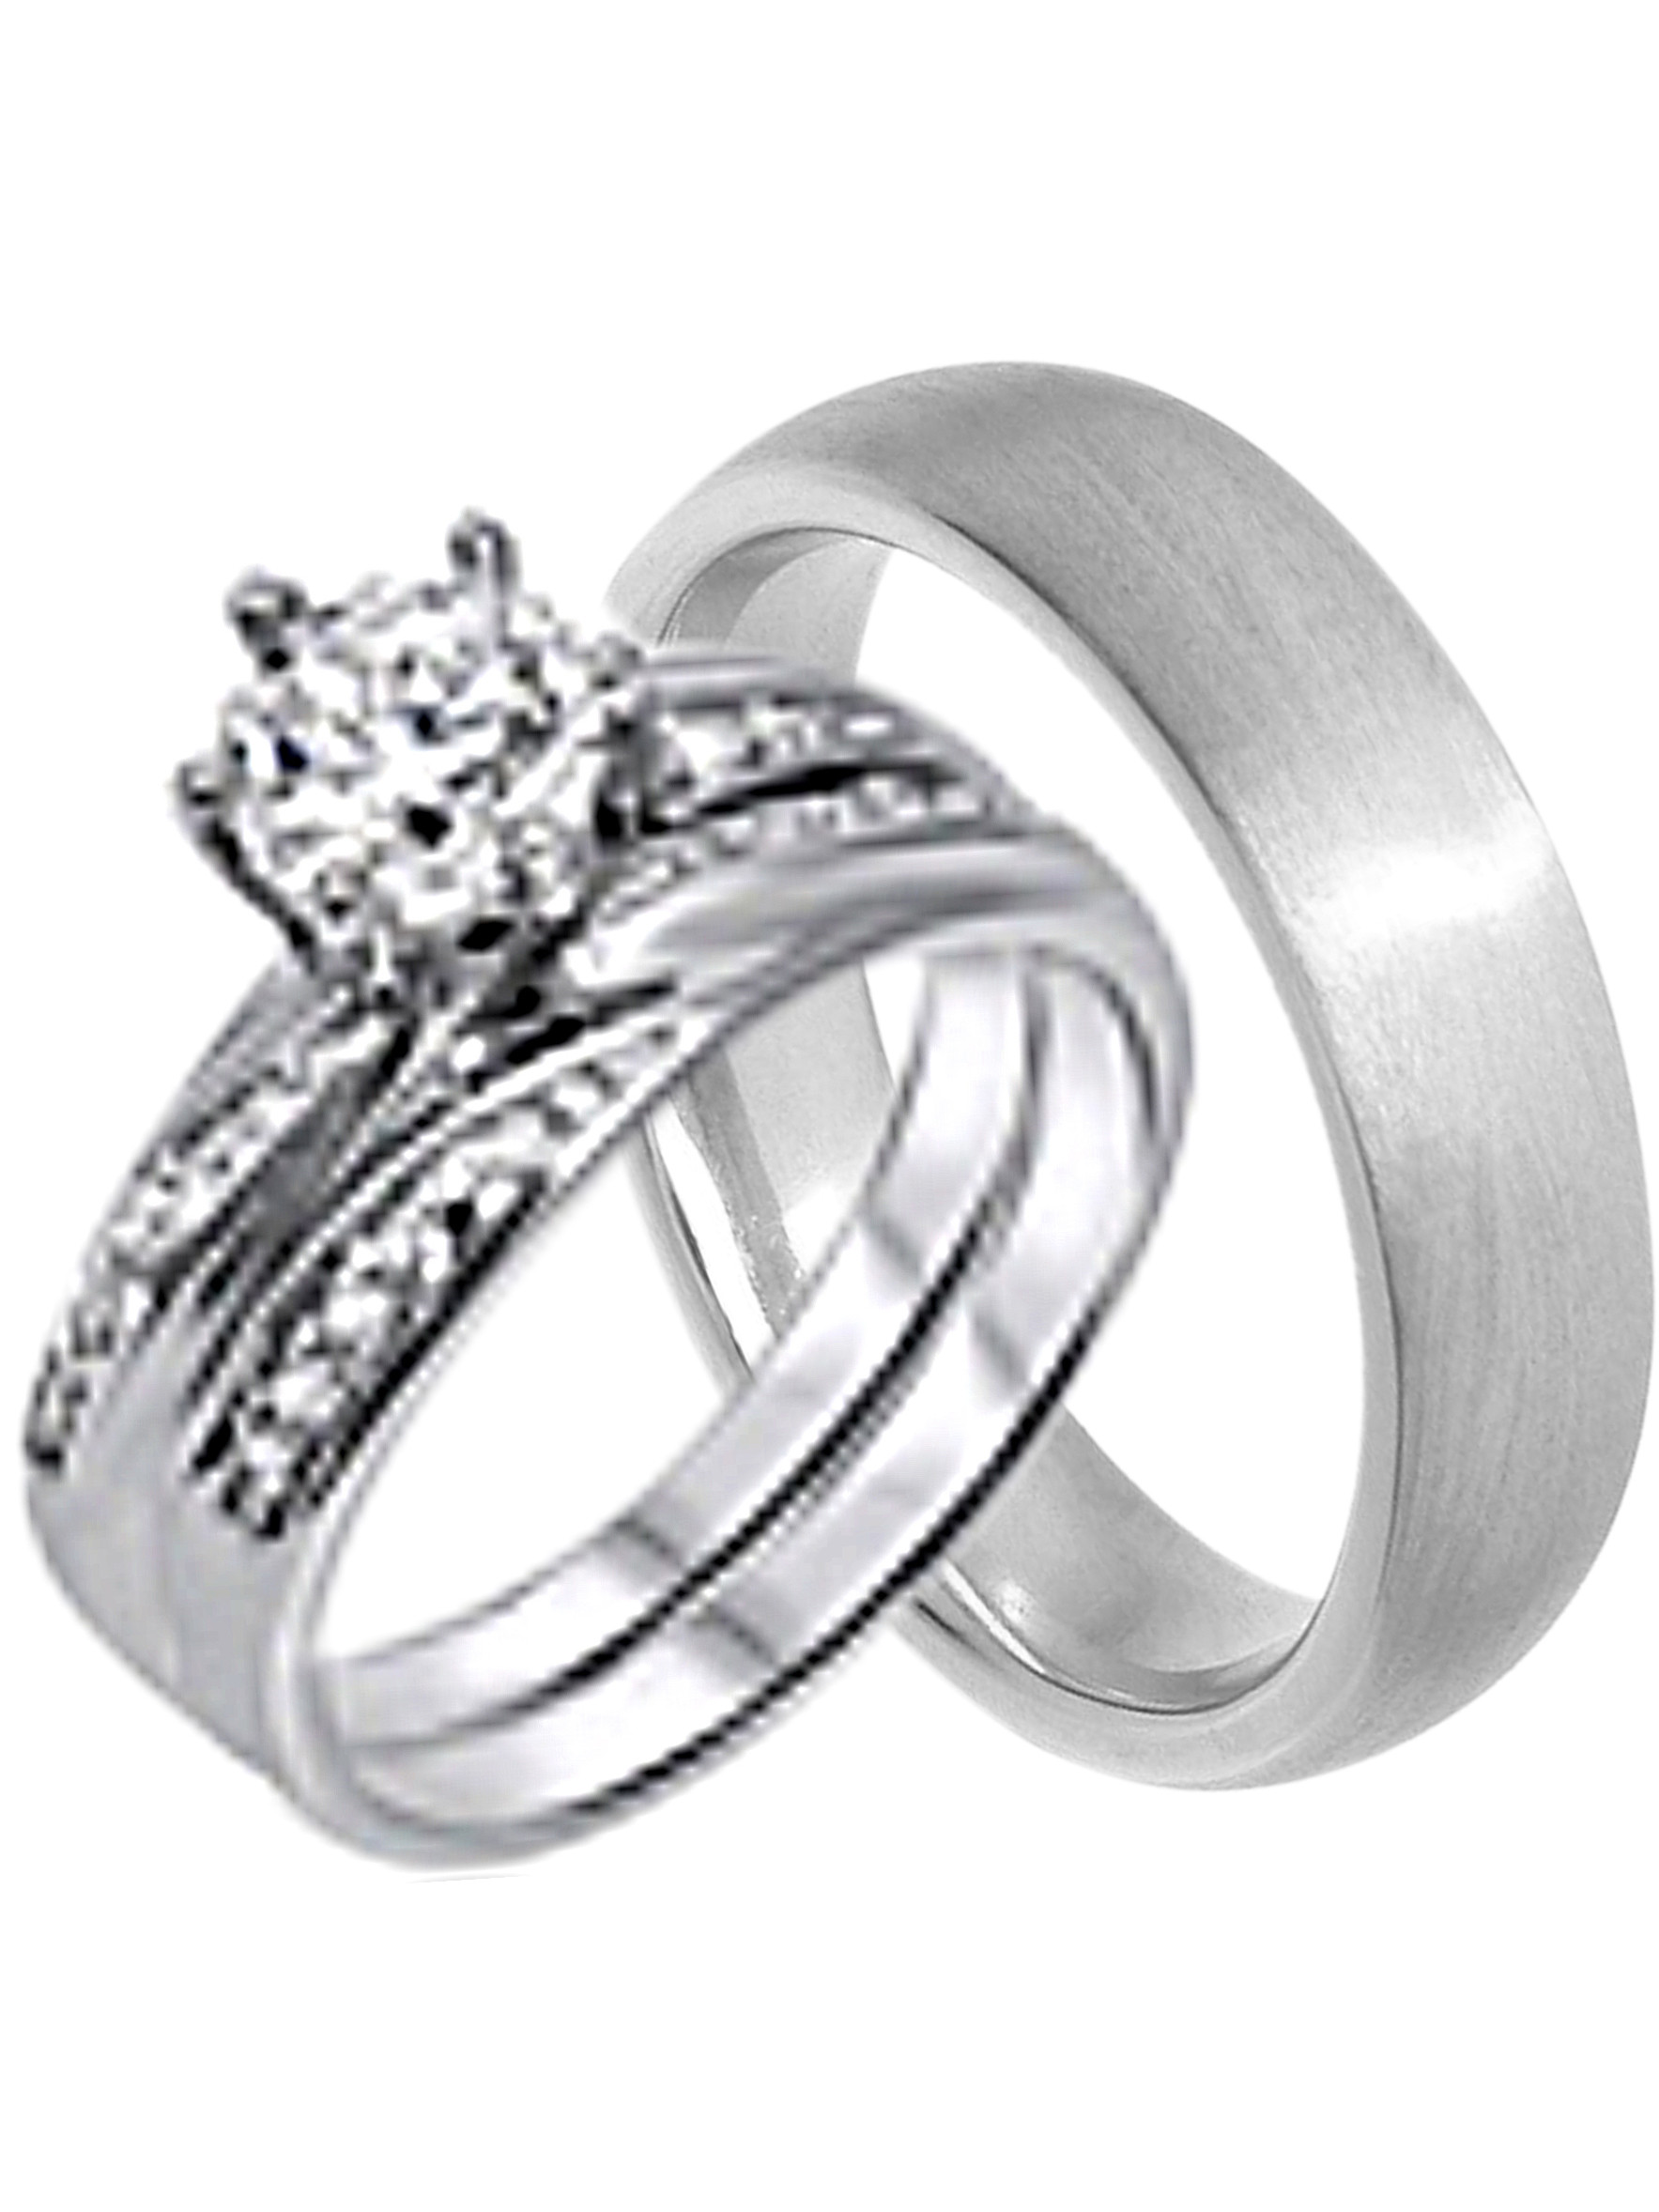 Walmart Wedding Bands For Him
 His and Hers Wedding Ring Set Cheap Wedding Bands for Him